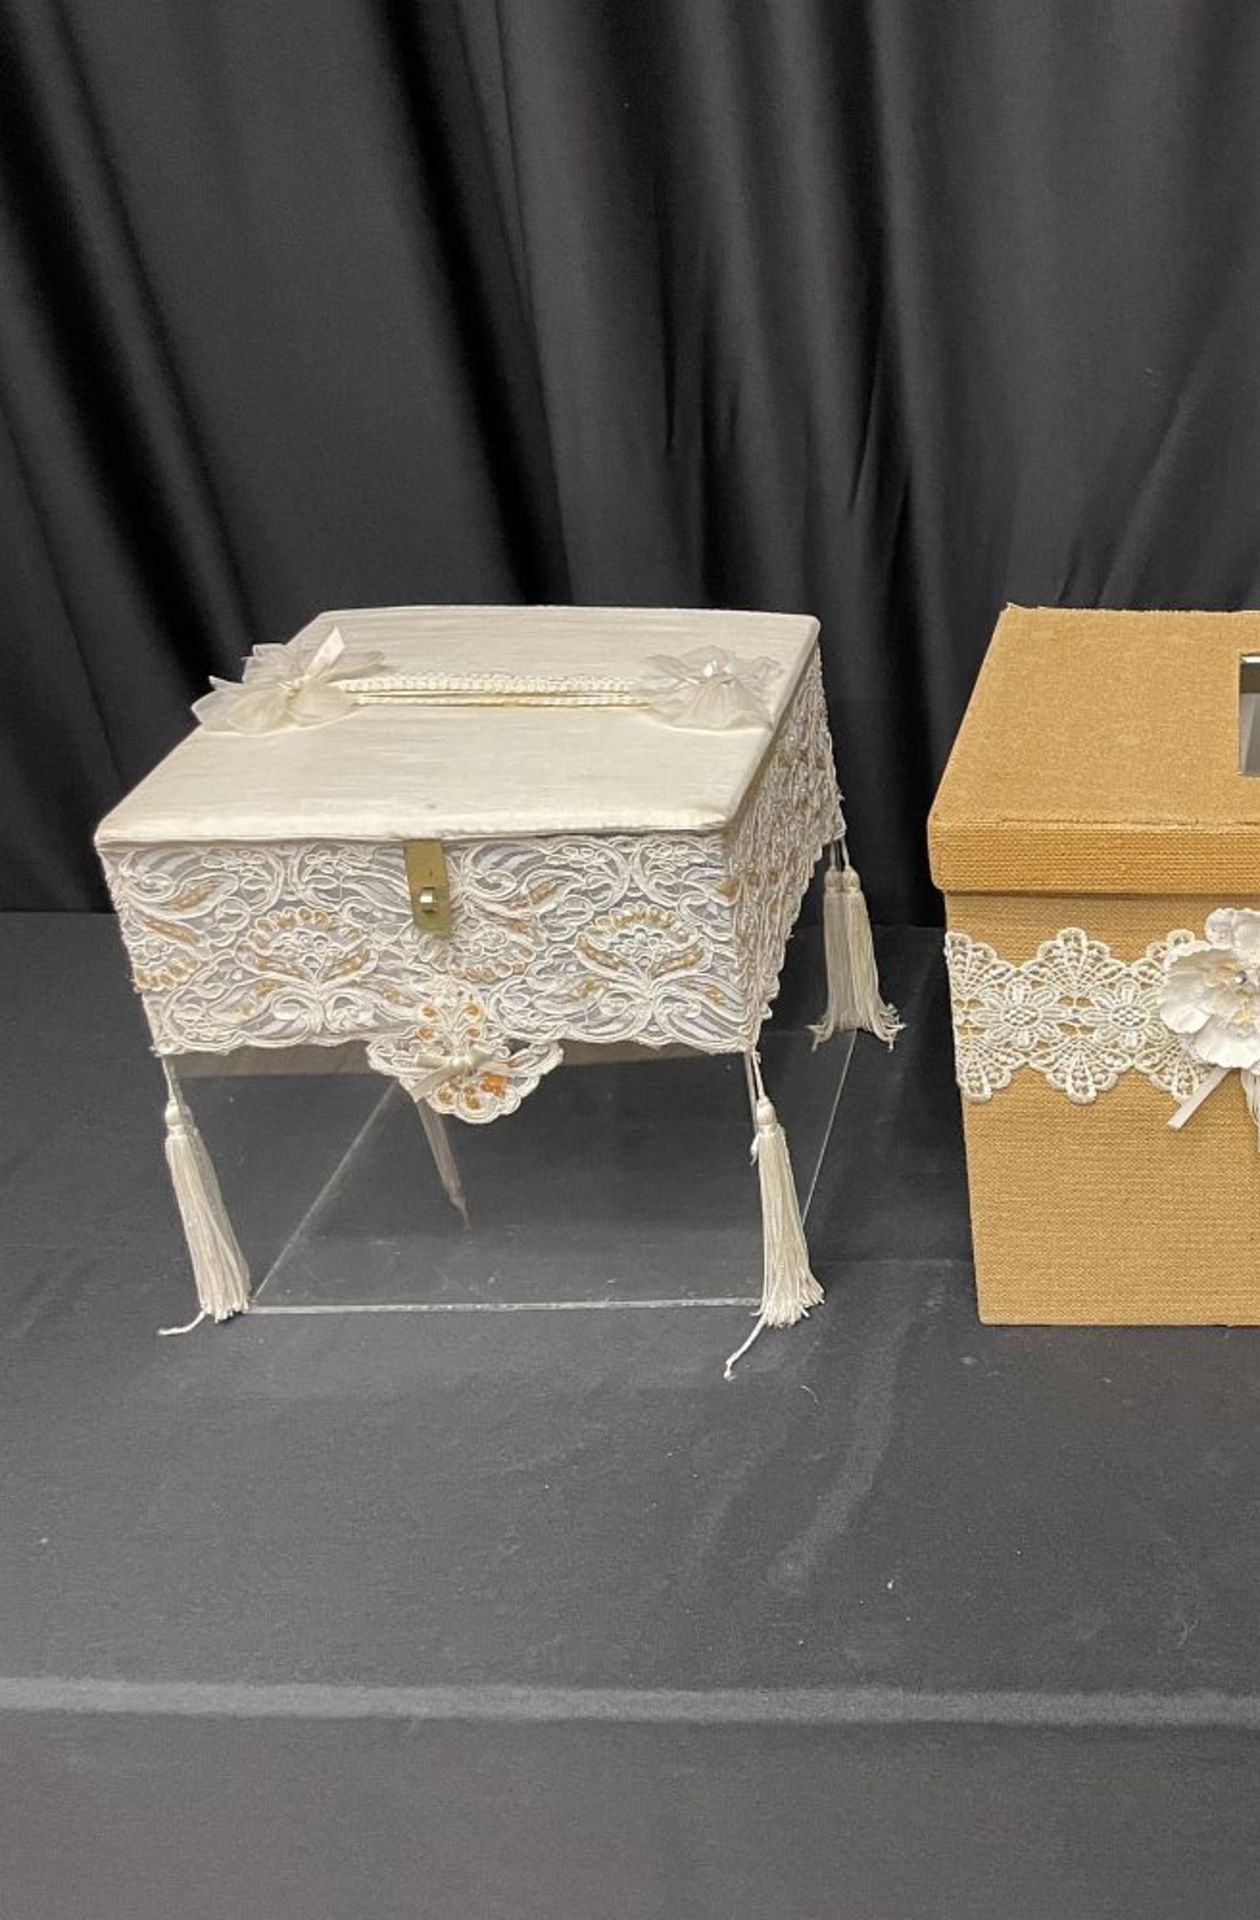 ACRYLIC & LACE BOX FOR CARDS